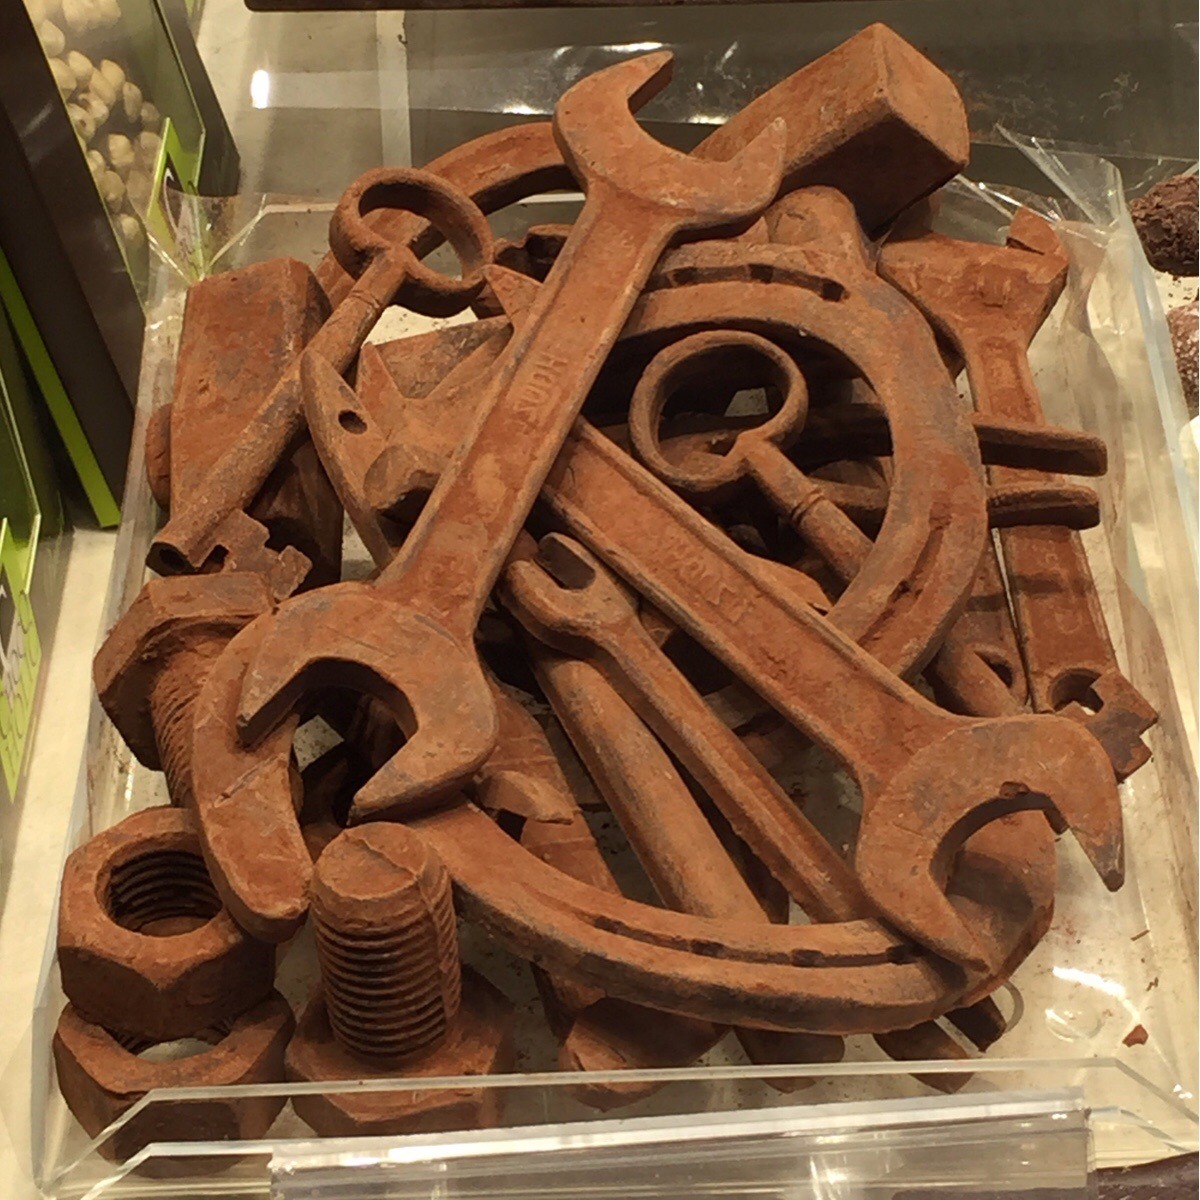 these rusty tools are actually made of chocolate - meme